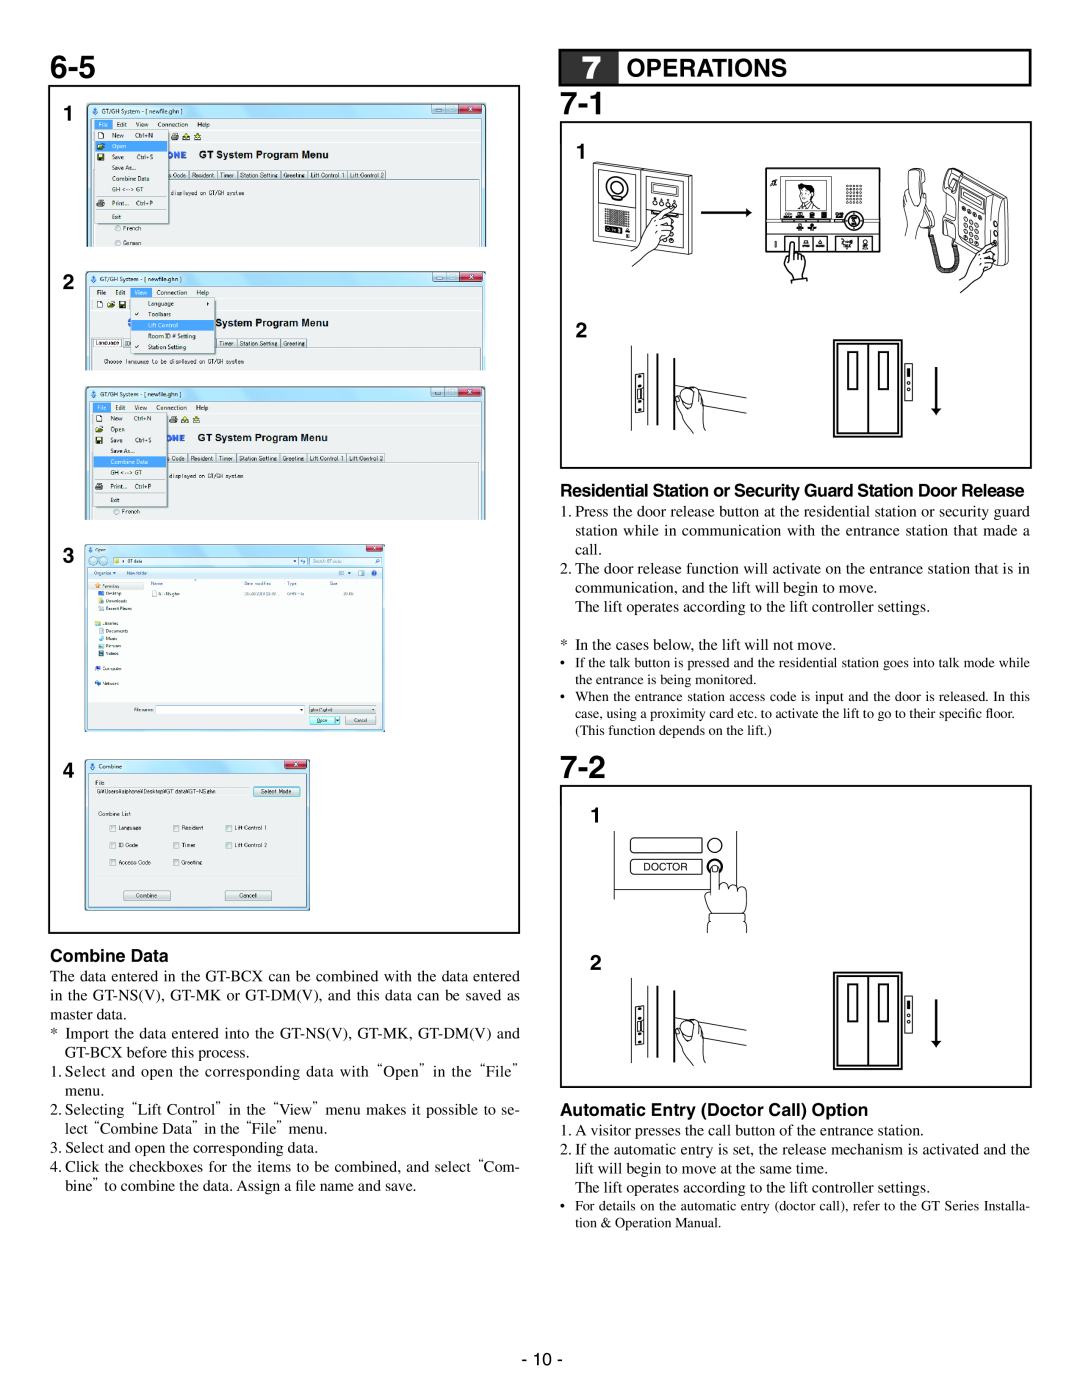 Aiphone GTW-LC service manual Operations, Combine Data, Residential Station or Security Guard Station Door Release 